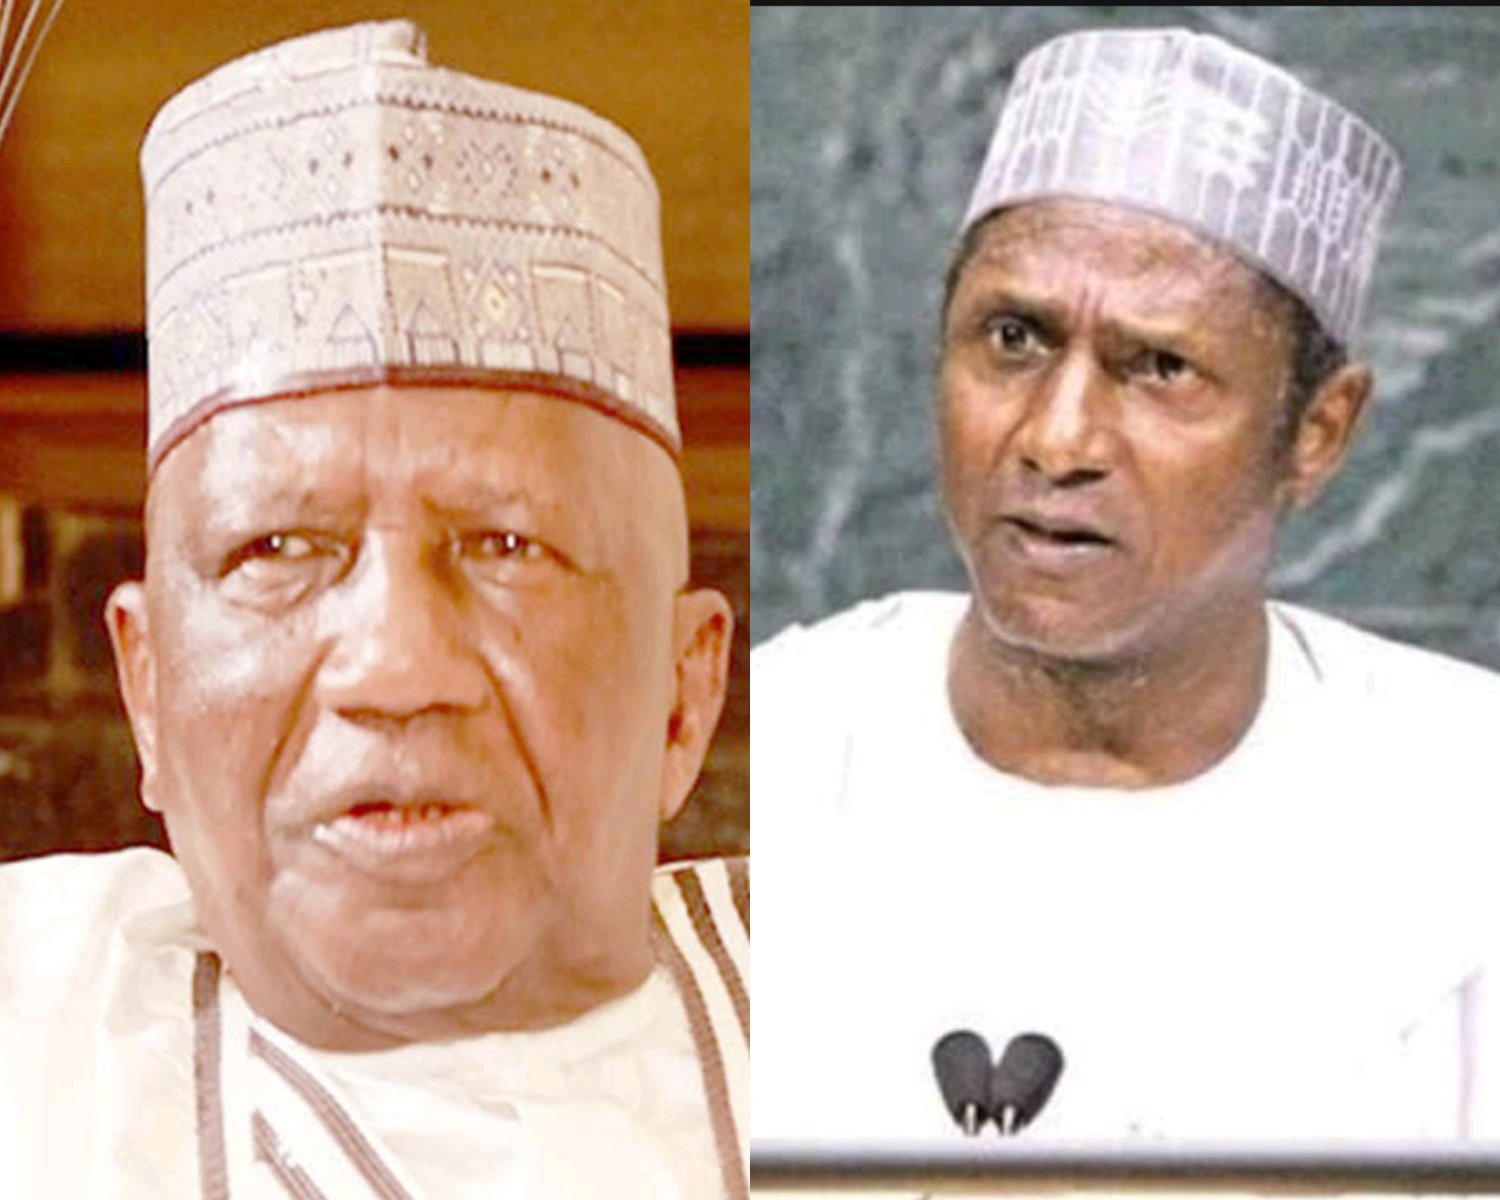 Yar'Adua said he wanted to give me something but did not know if I would accept it -According to Tafida